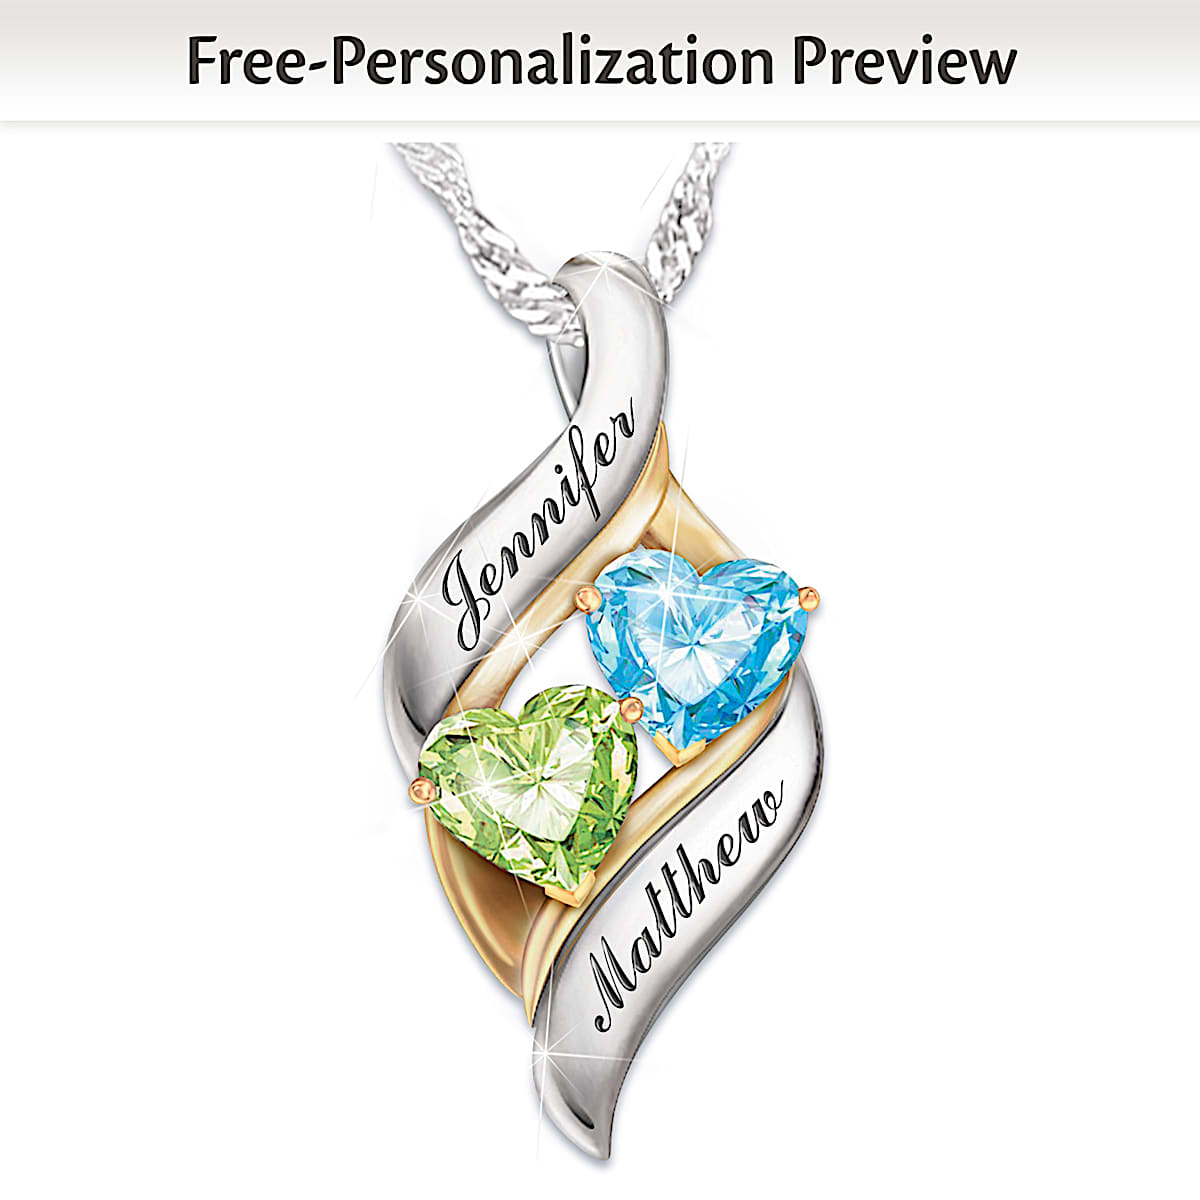 Engraved Heart Family Birthstone Necklace for Mom